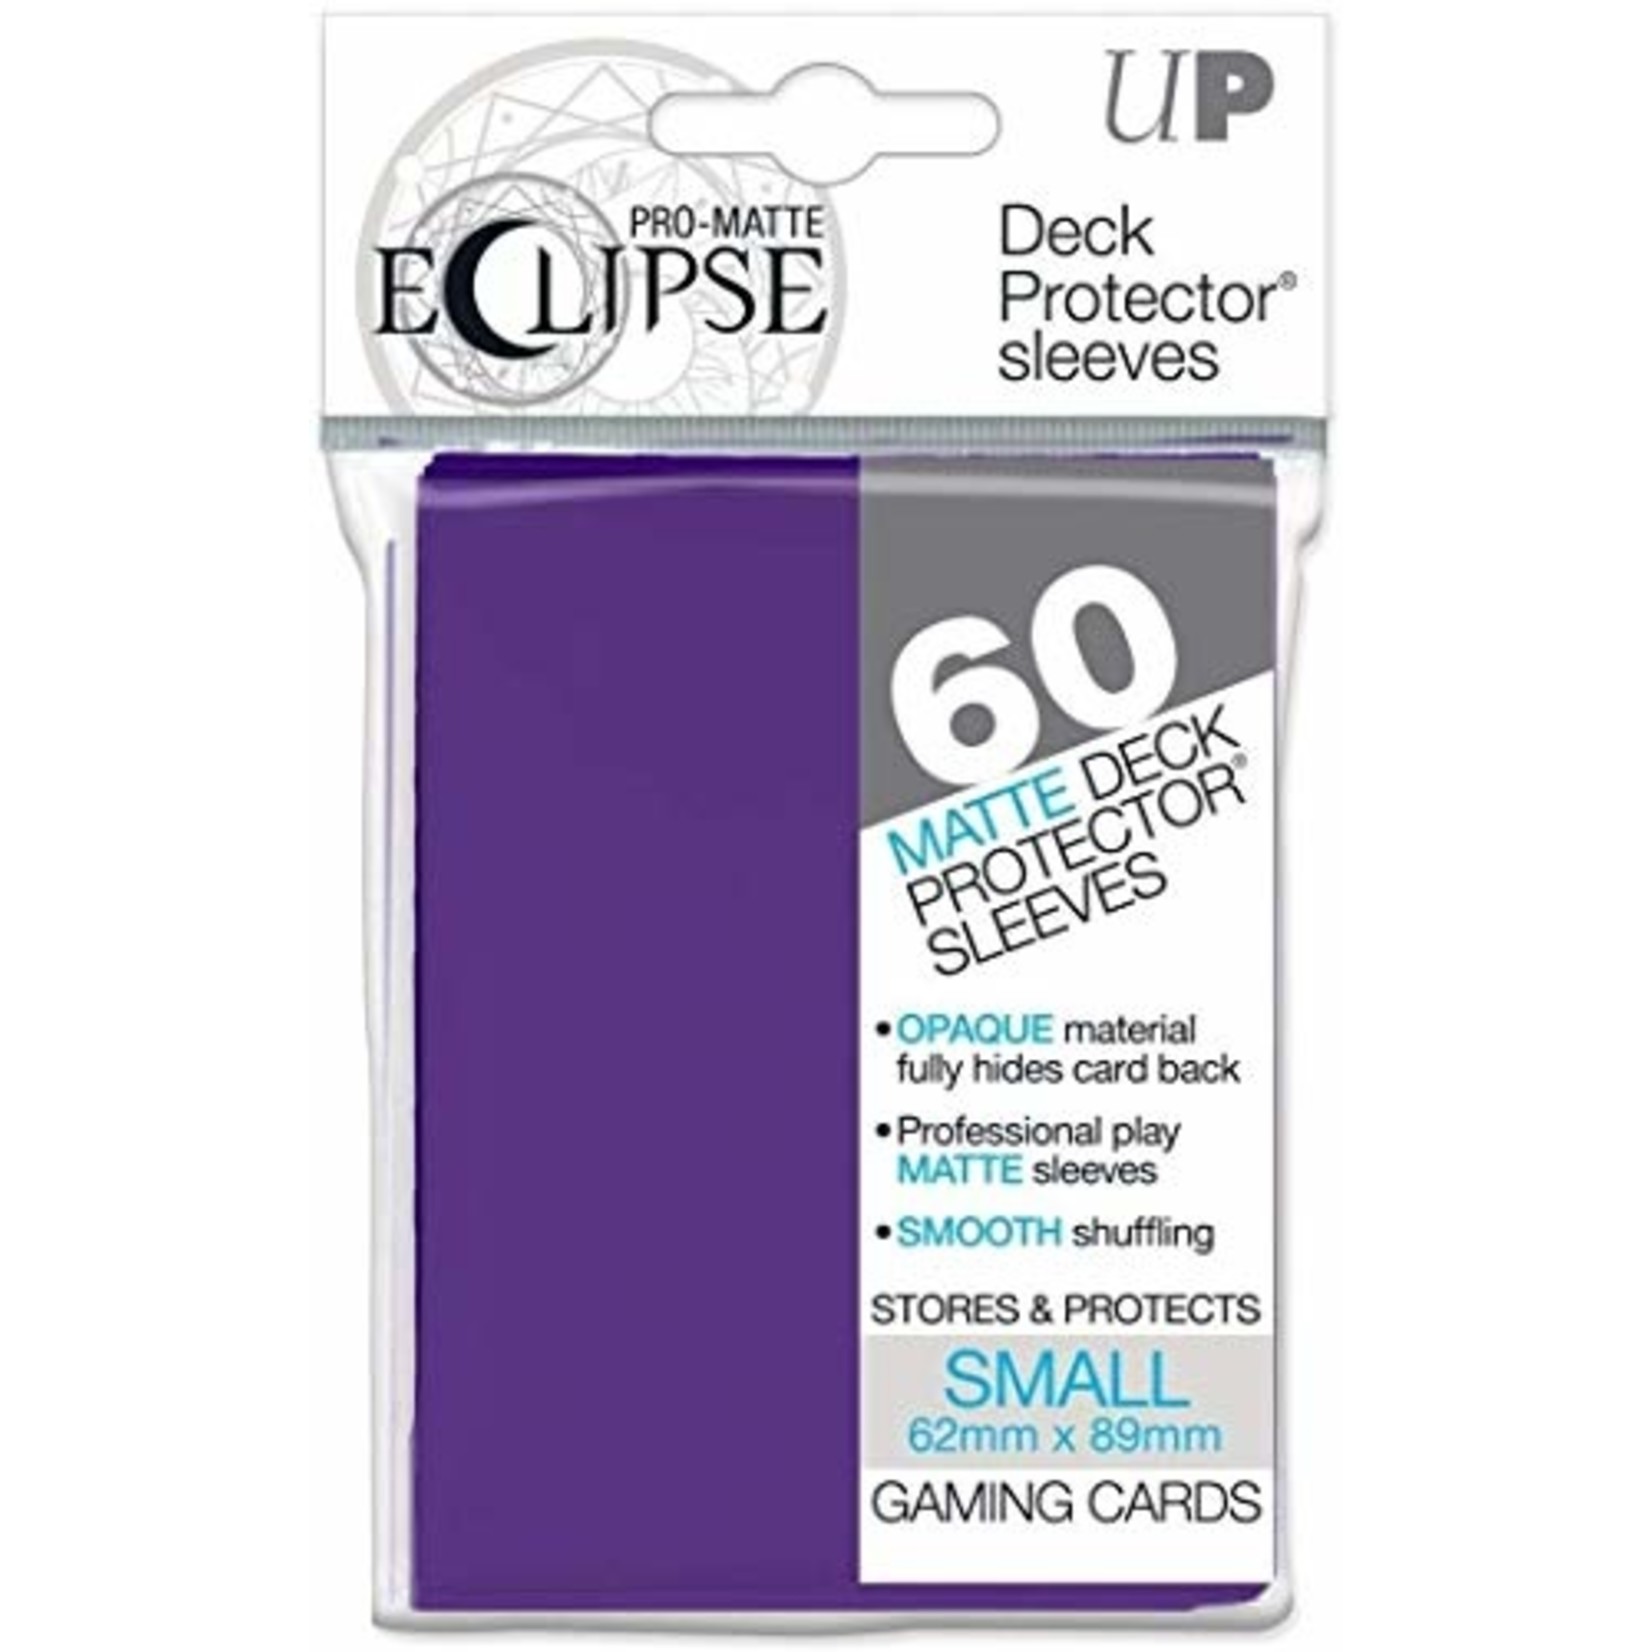 Eclipse Small Pro Matte Sleeves (60 Pack), Royal Purple